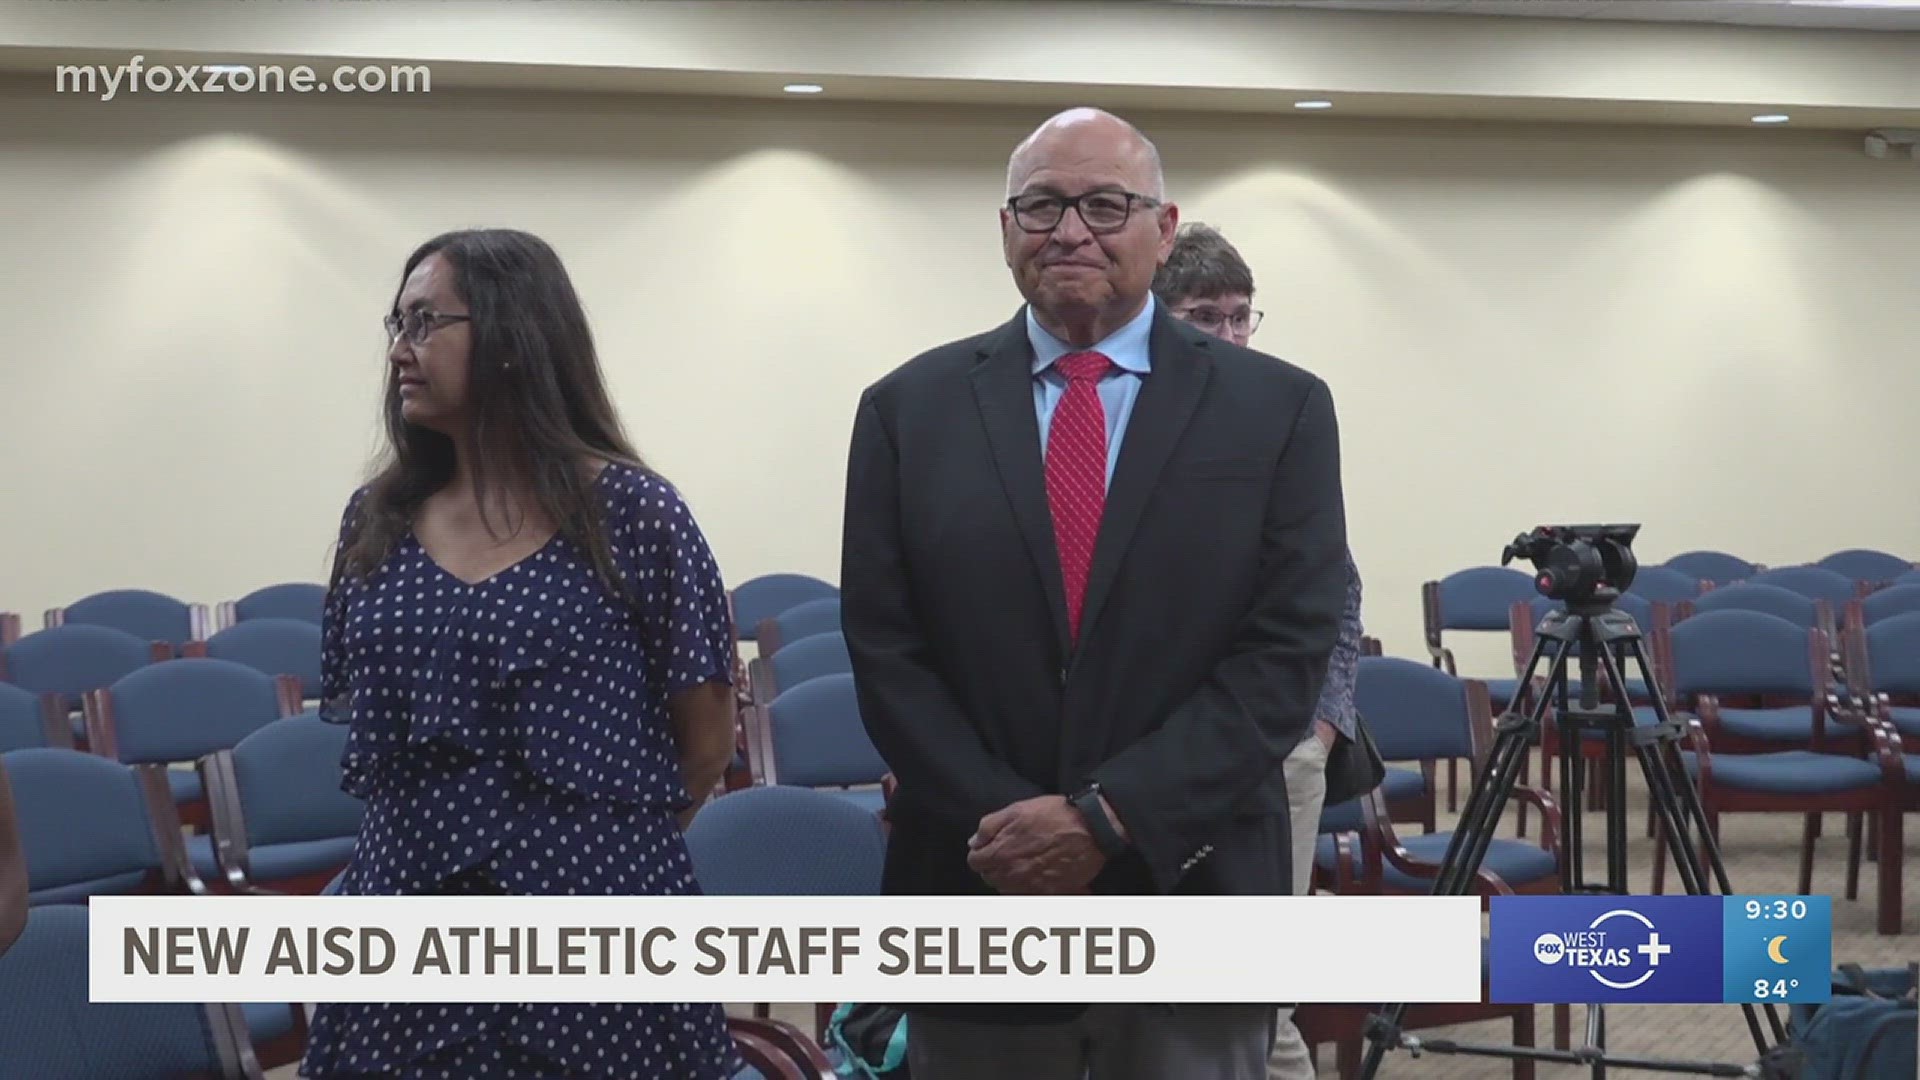 Lou Mora will serve as the assistant athletic director and Alfonzo Franklin will serve as the Abilene Eagles girls basketball coach.